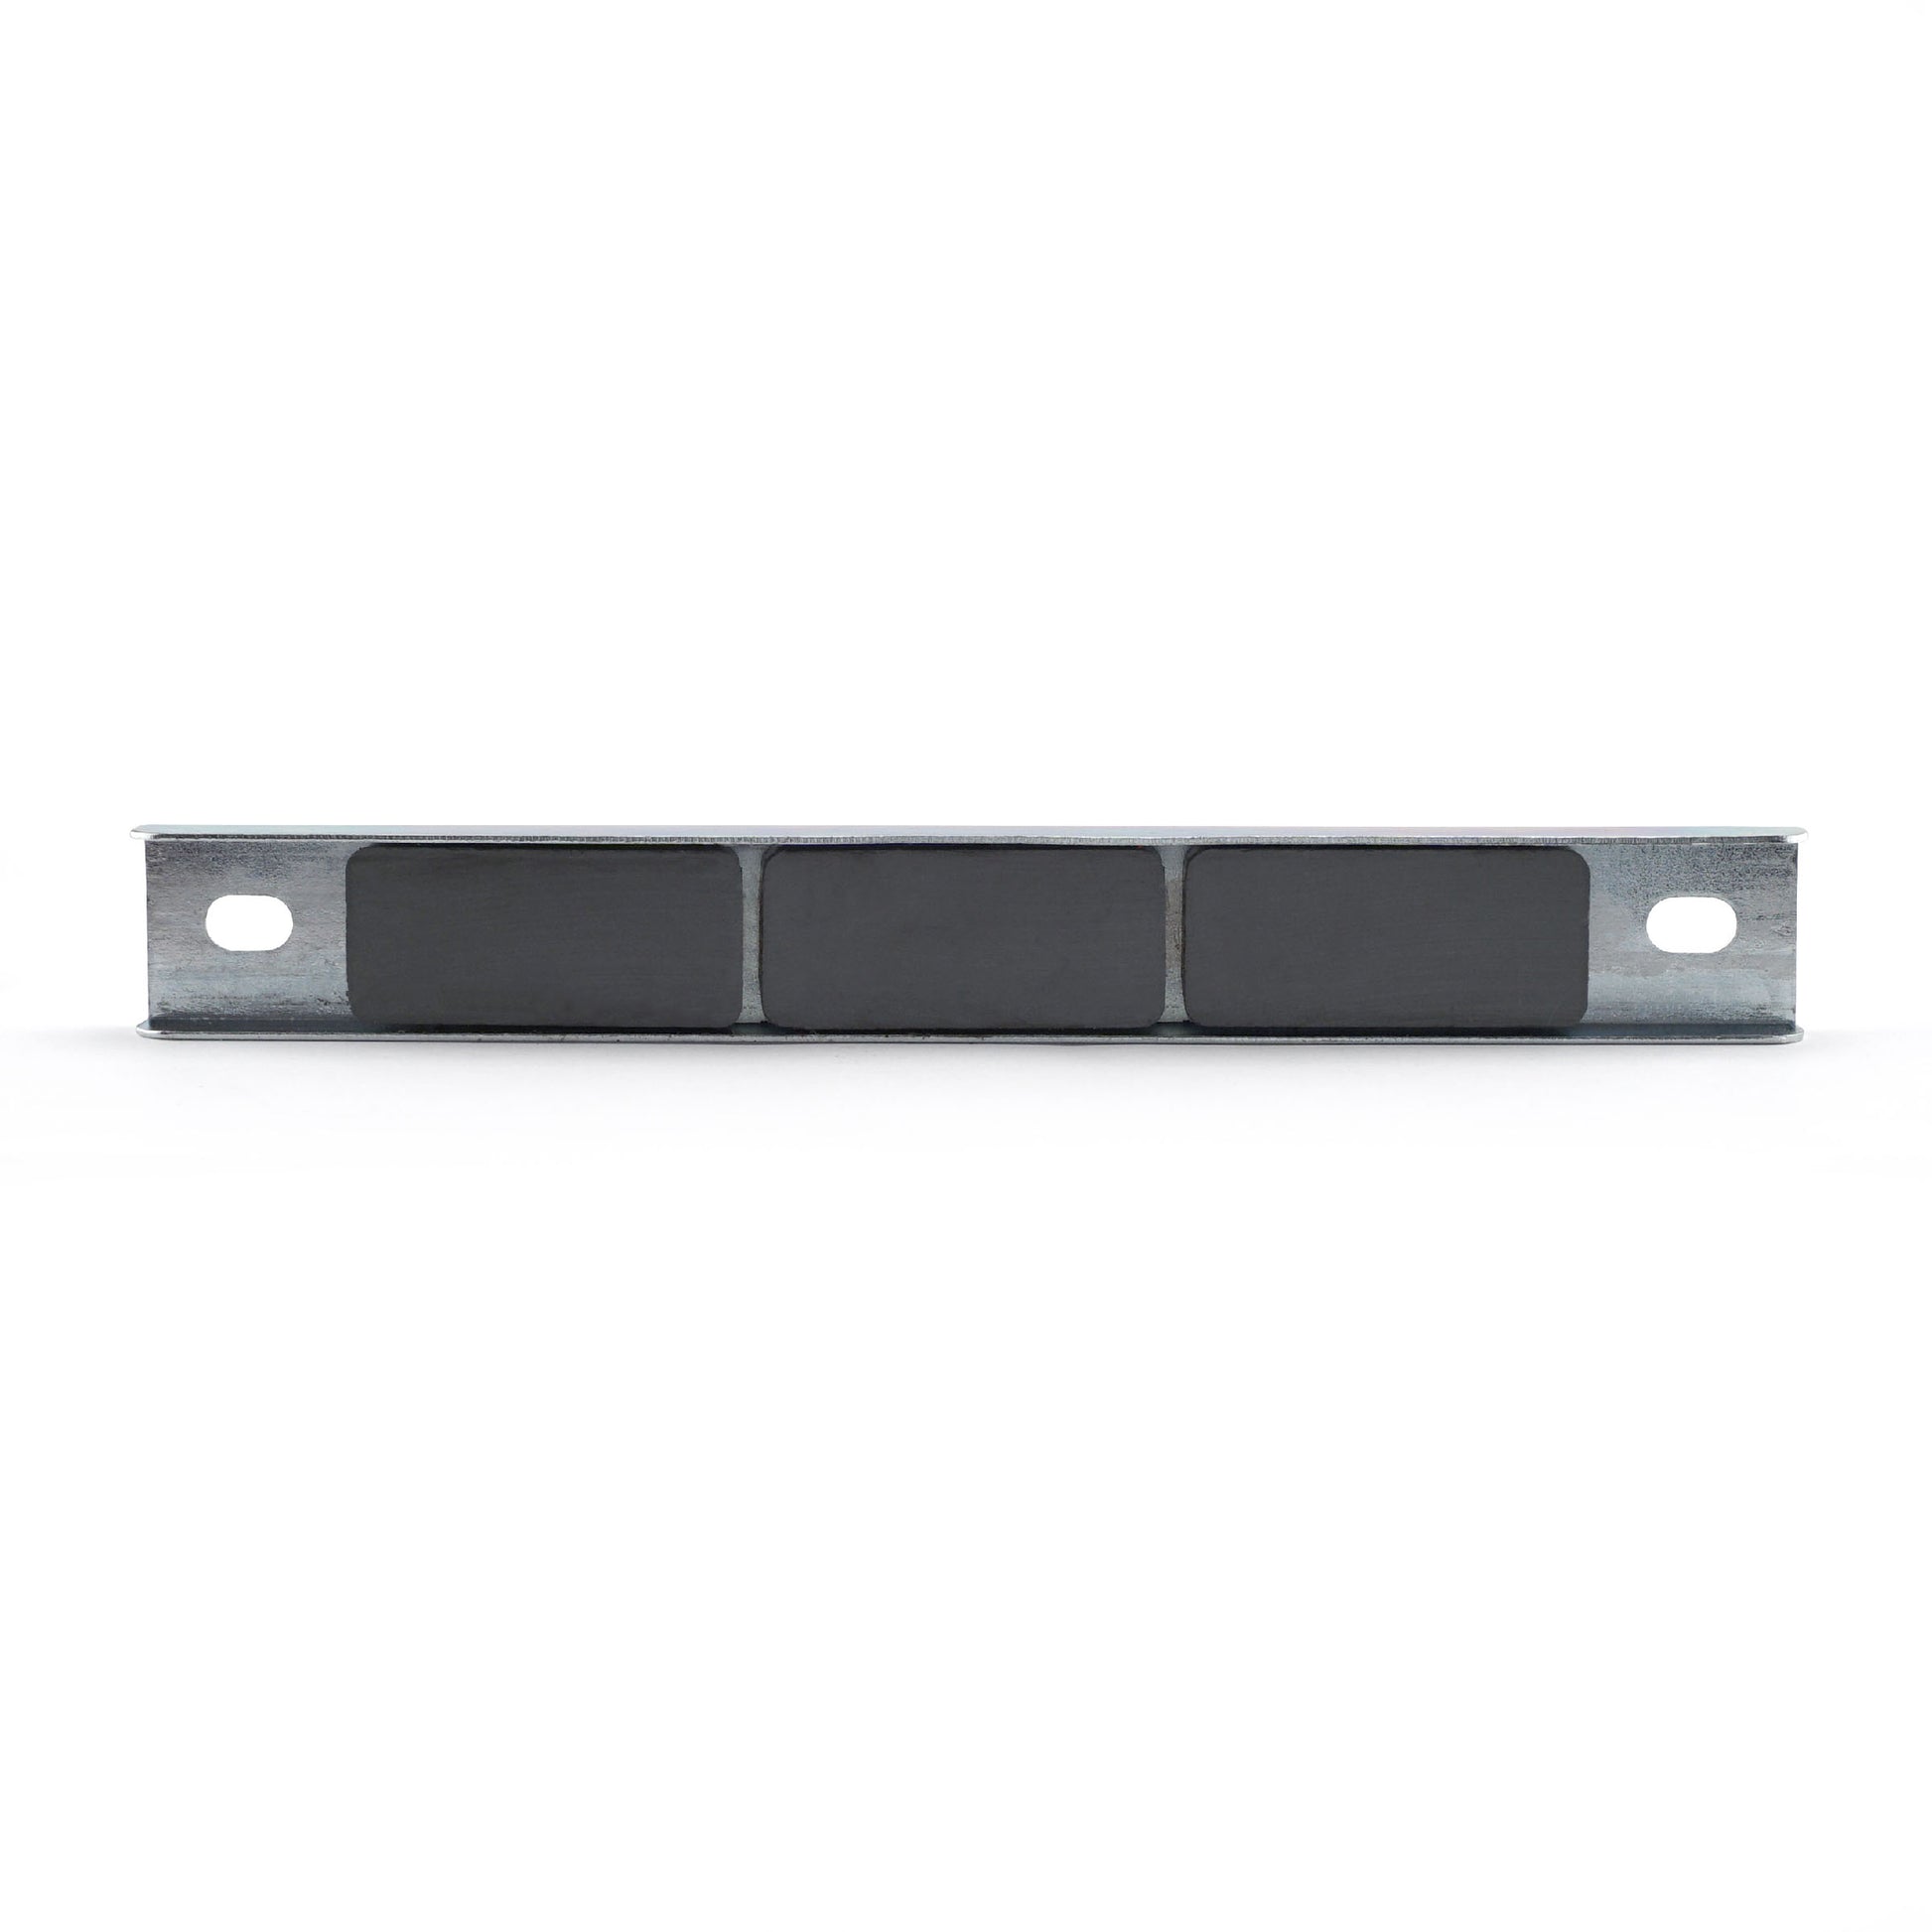 Load image into Gallery viewer, CBA360C Ceramic Latch Magnet Channel Assembly - Top View